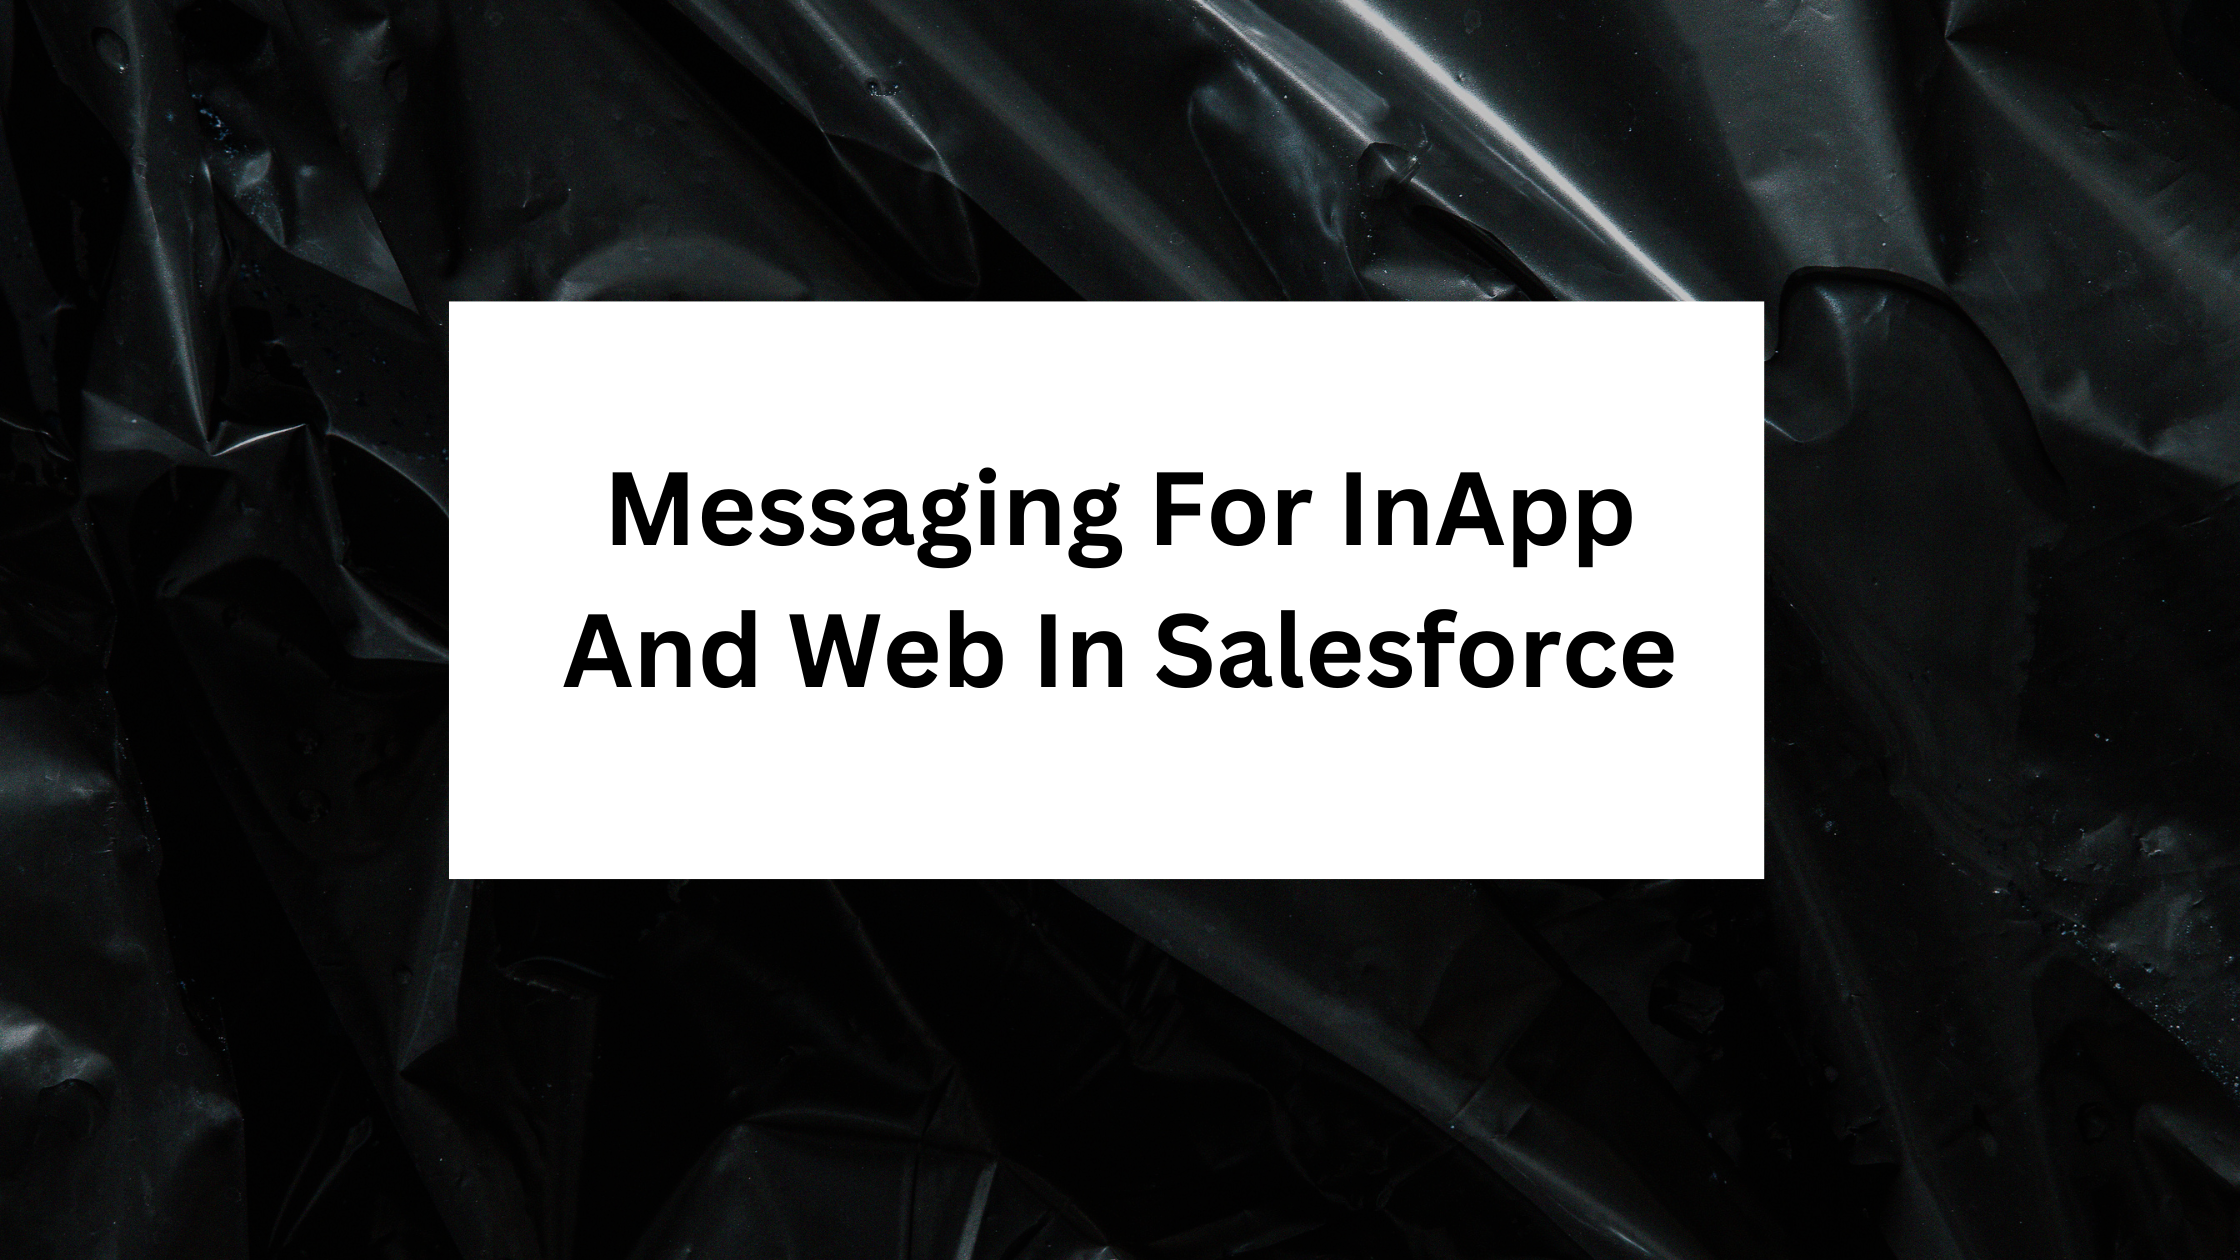 Messaging For InApp And Web In Salesforce